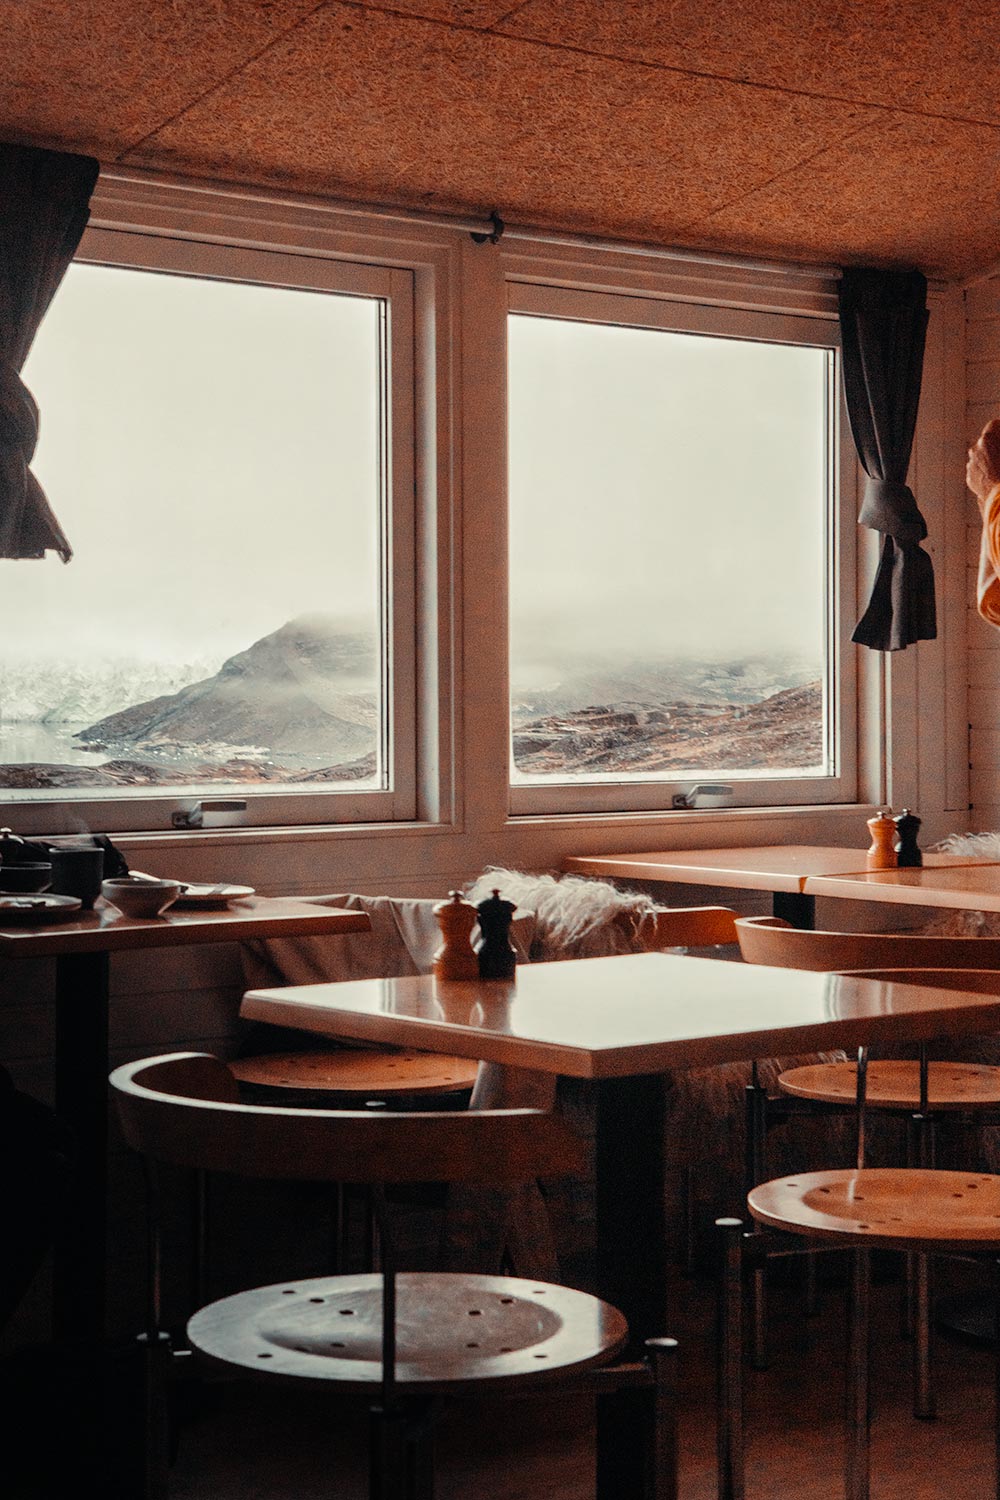 Unwind in the beauty of Eqi Lodge Greenland after a day of adventure